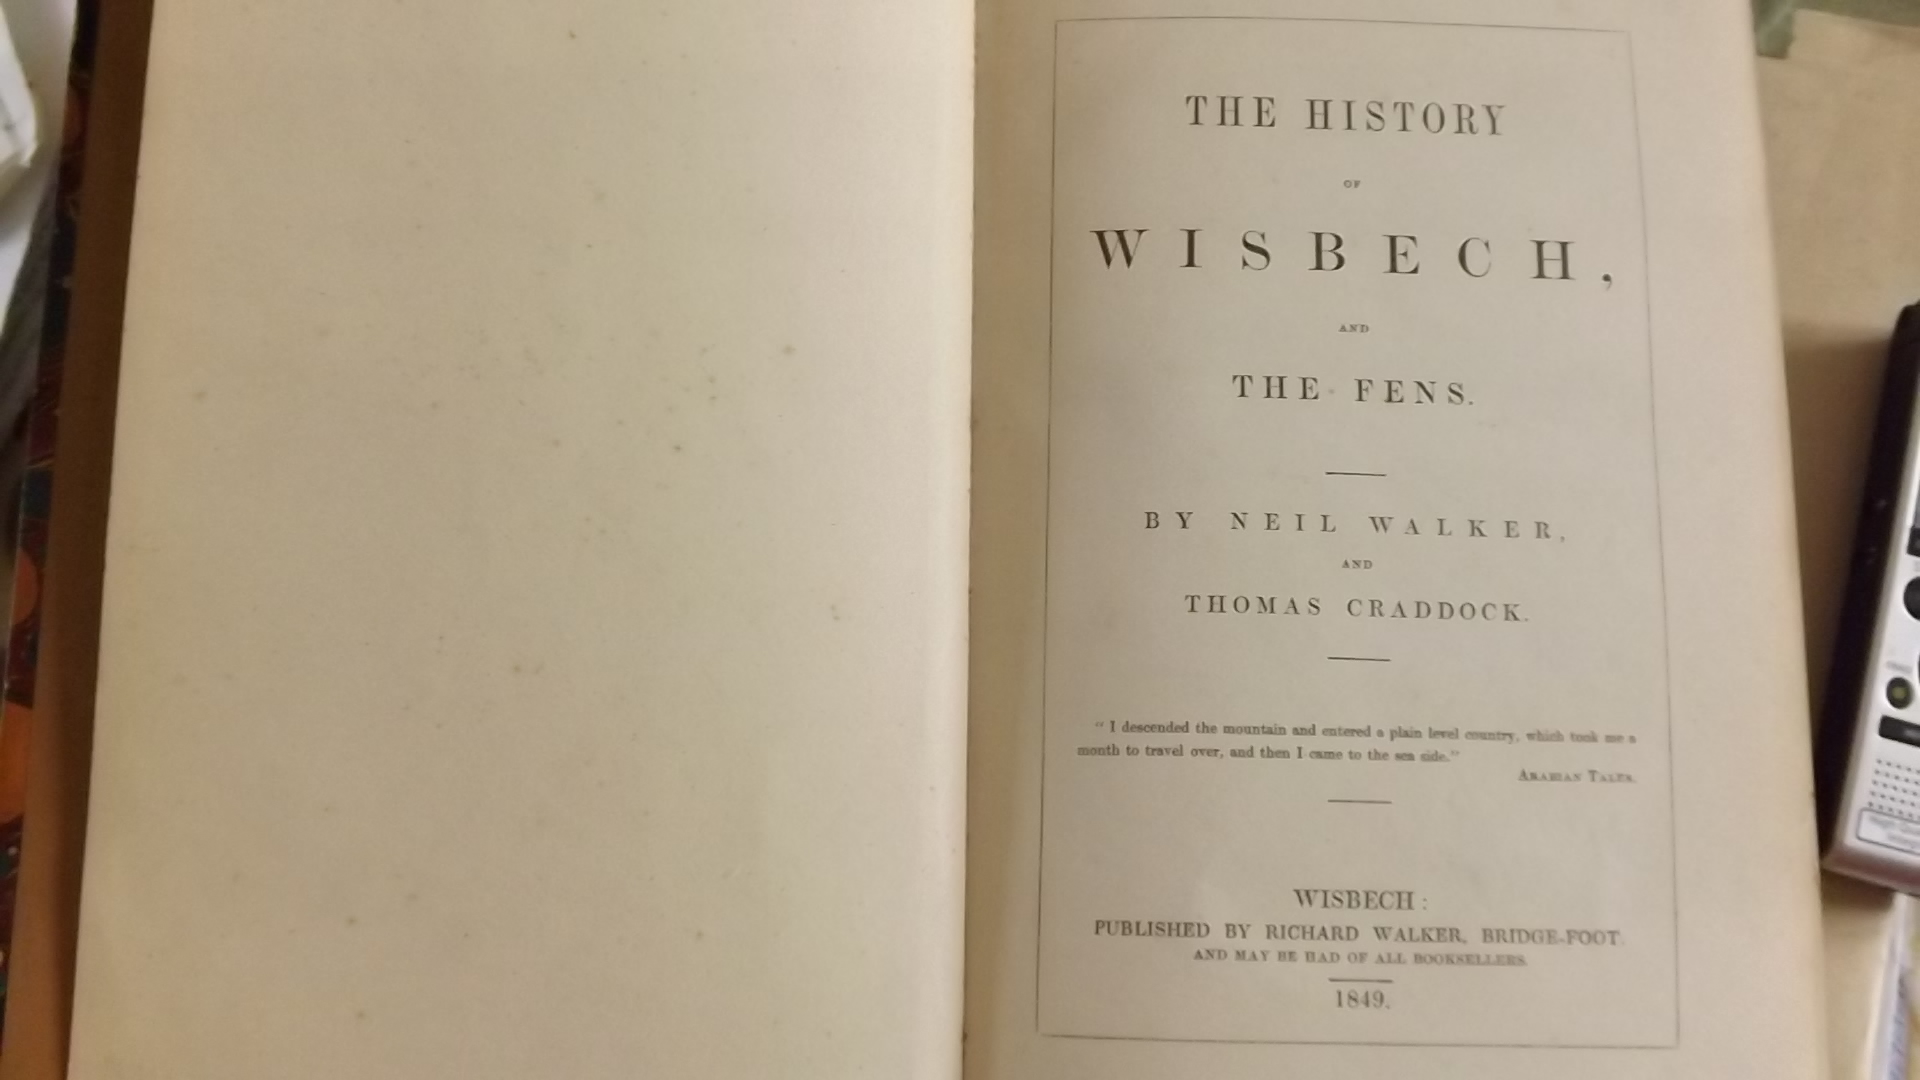 A quarter leather bound "History of Wisb